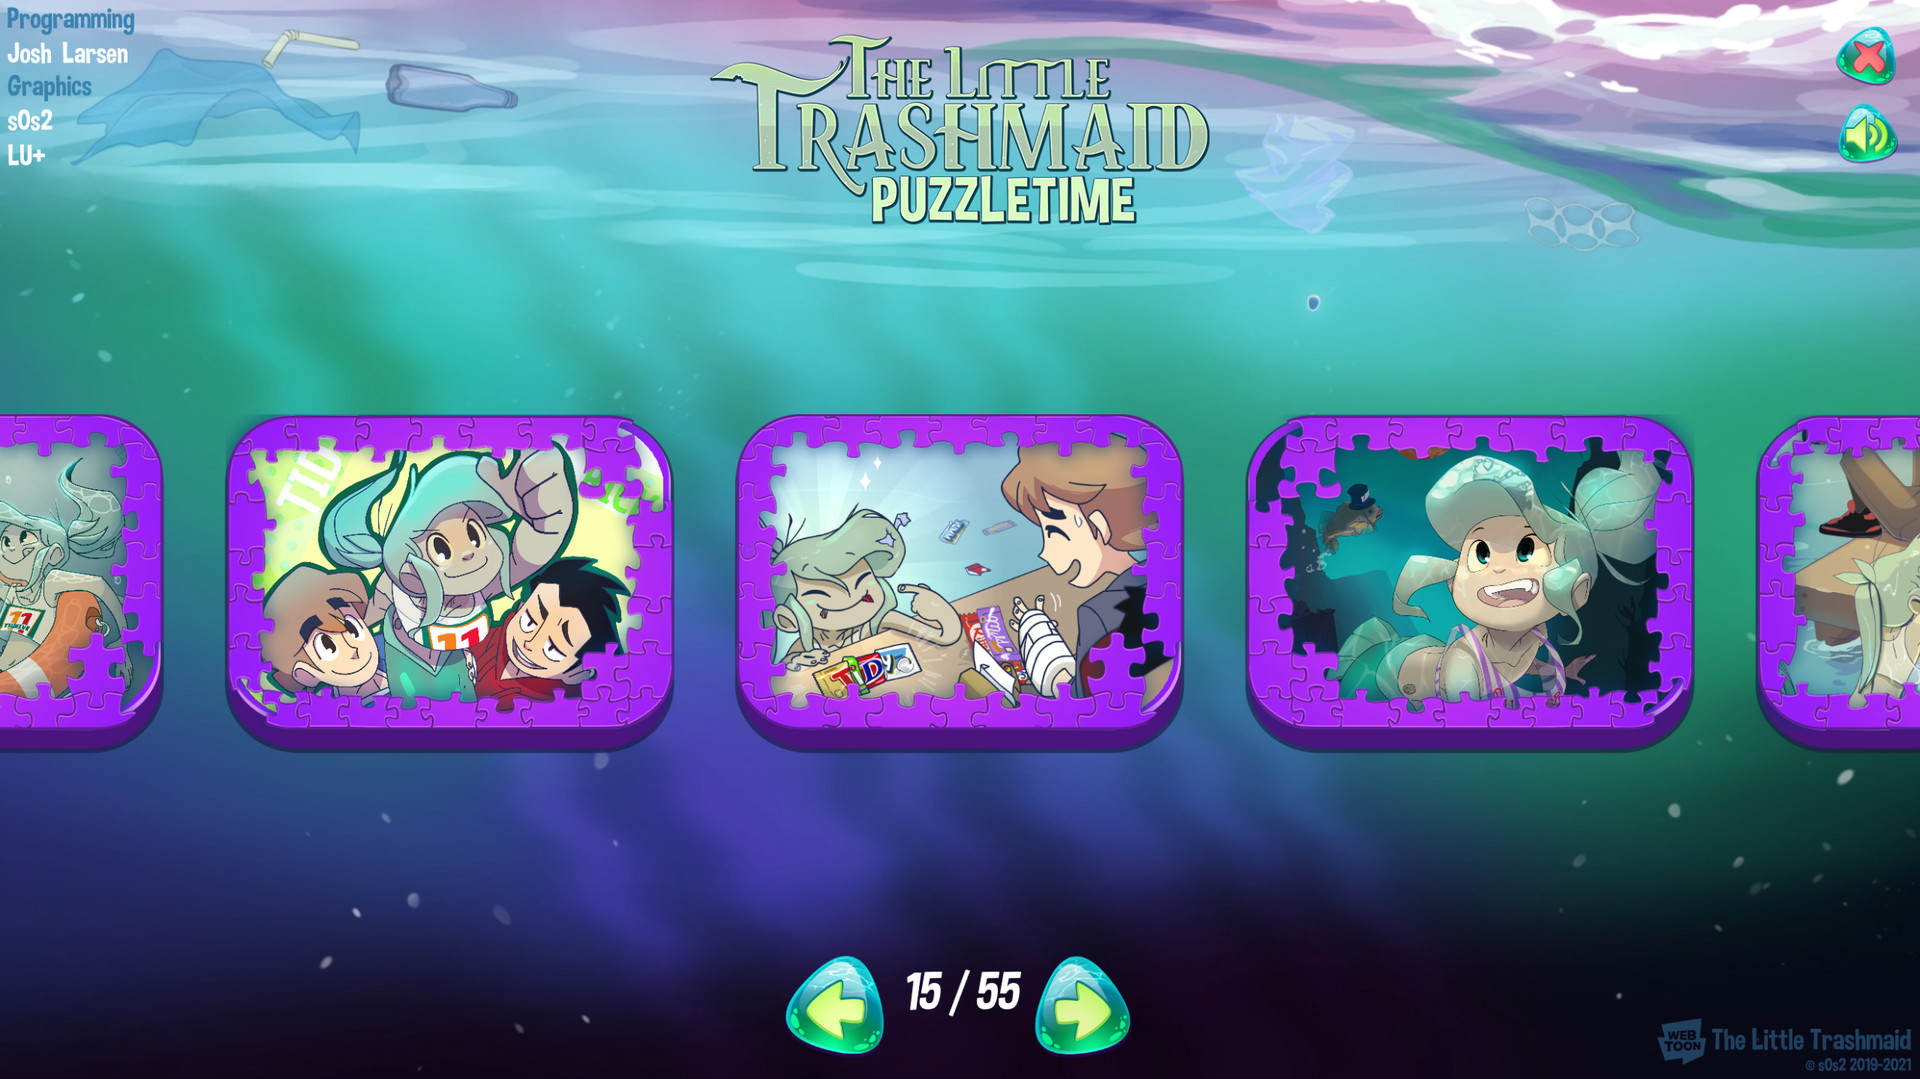 The Little Trashmaid Puzzletime - Win - (Steam)